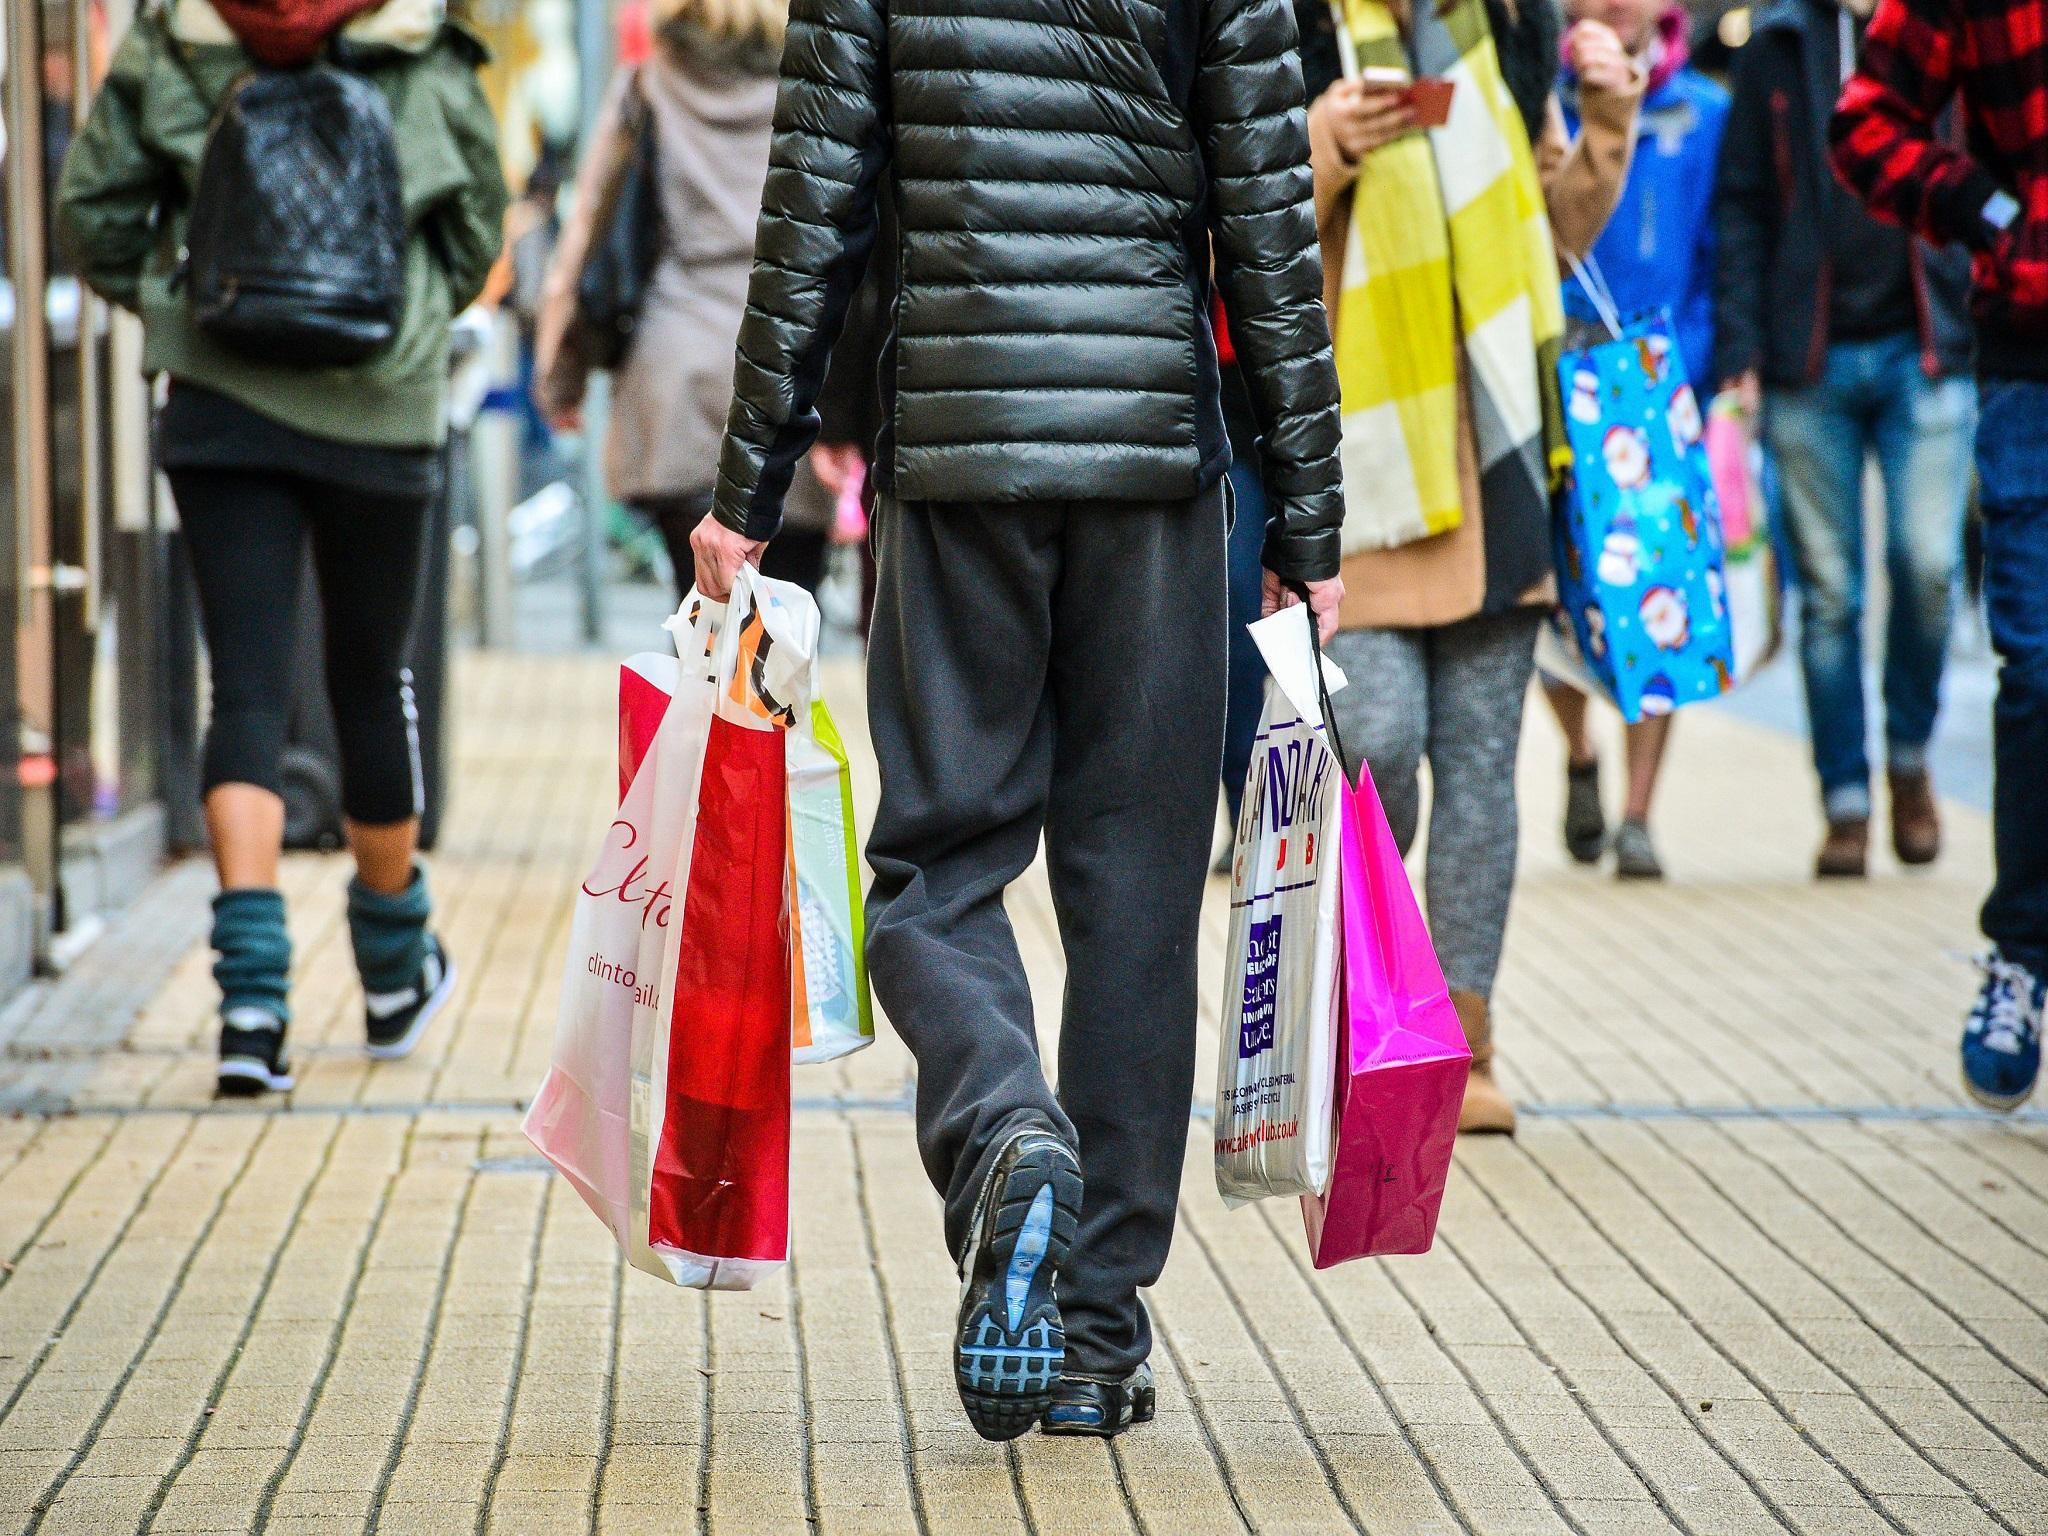 Retail was hit by unseasonably wet weather in July, affecting GDP